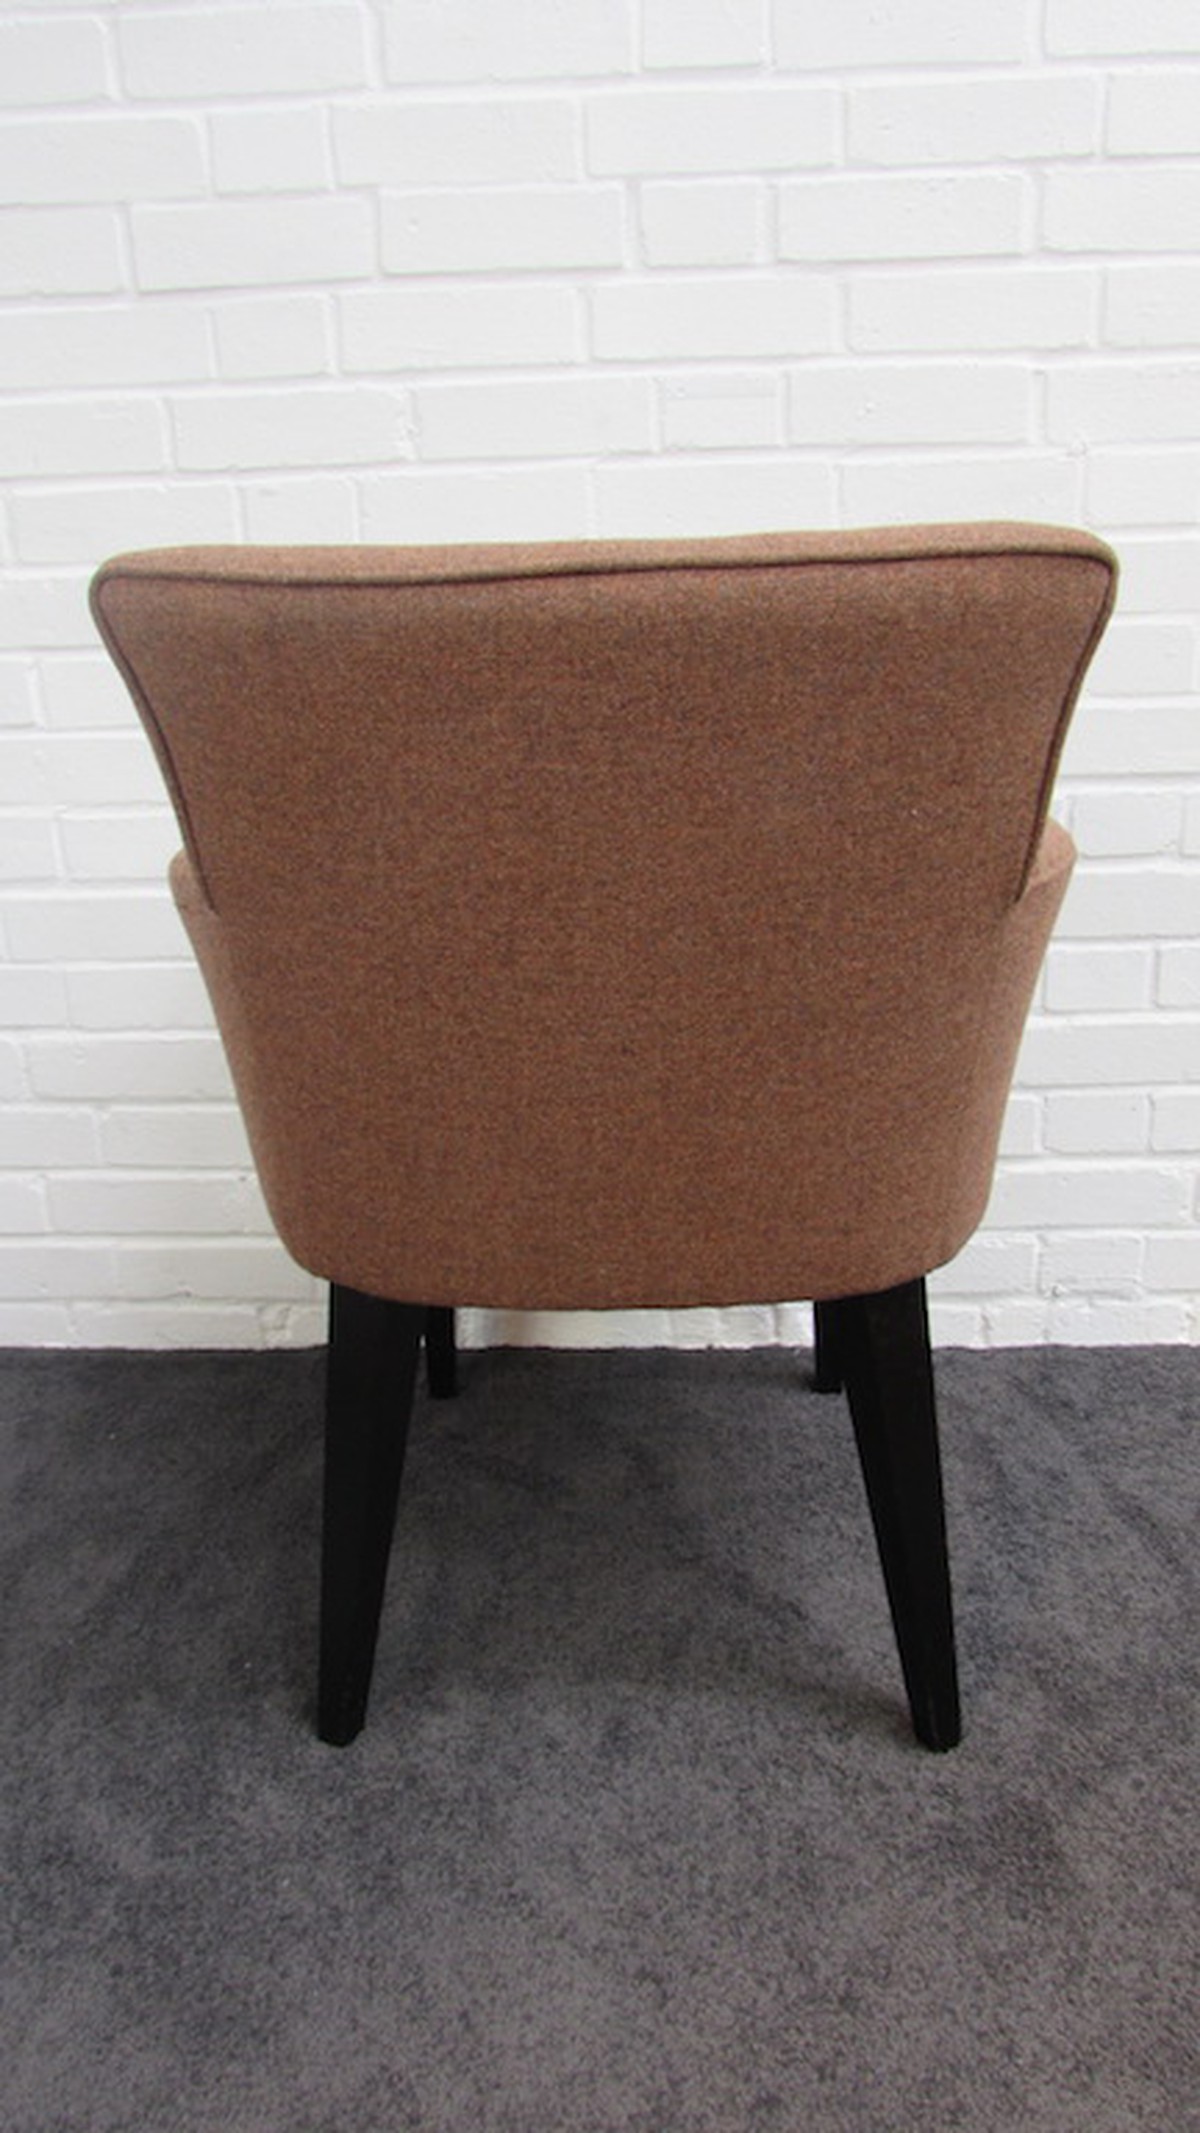 Secondhand Chairs and Tables | Lounge Furniture | 4x Tweed Speckled Tub